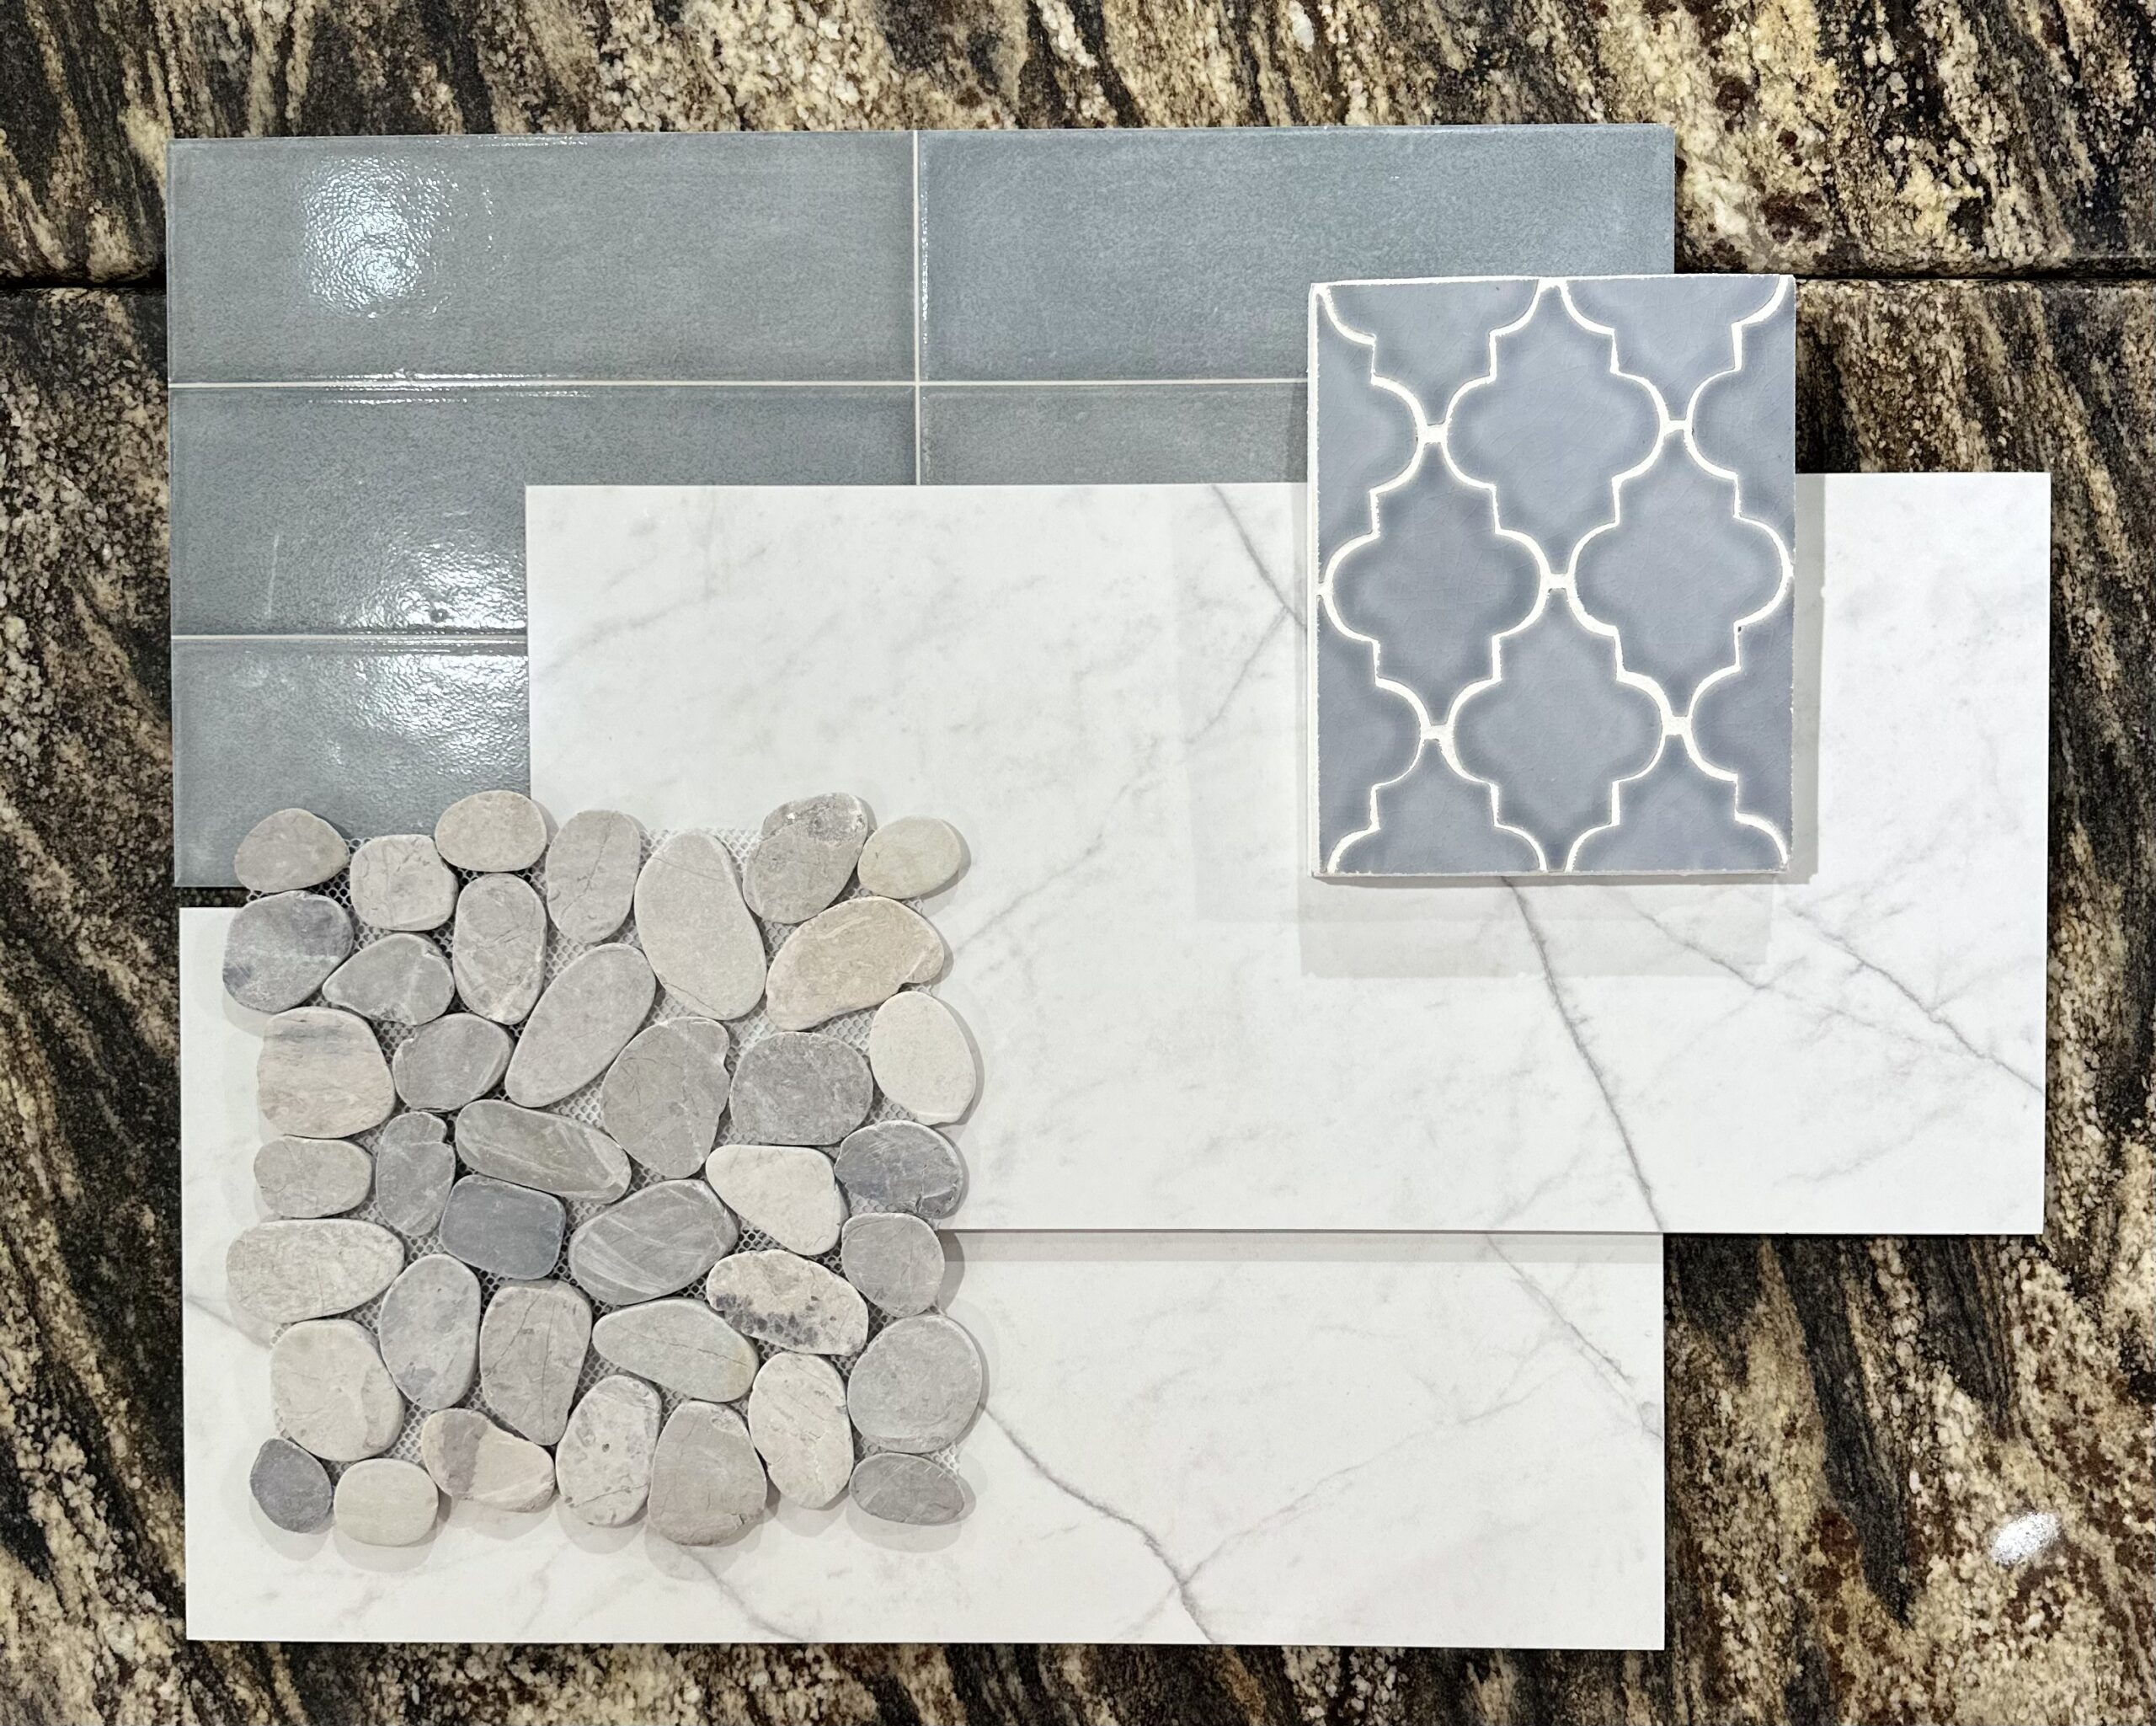 Beach-Inspired New Tile Combinations